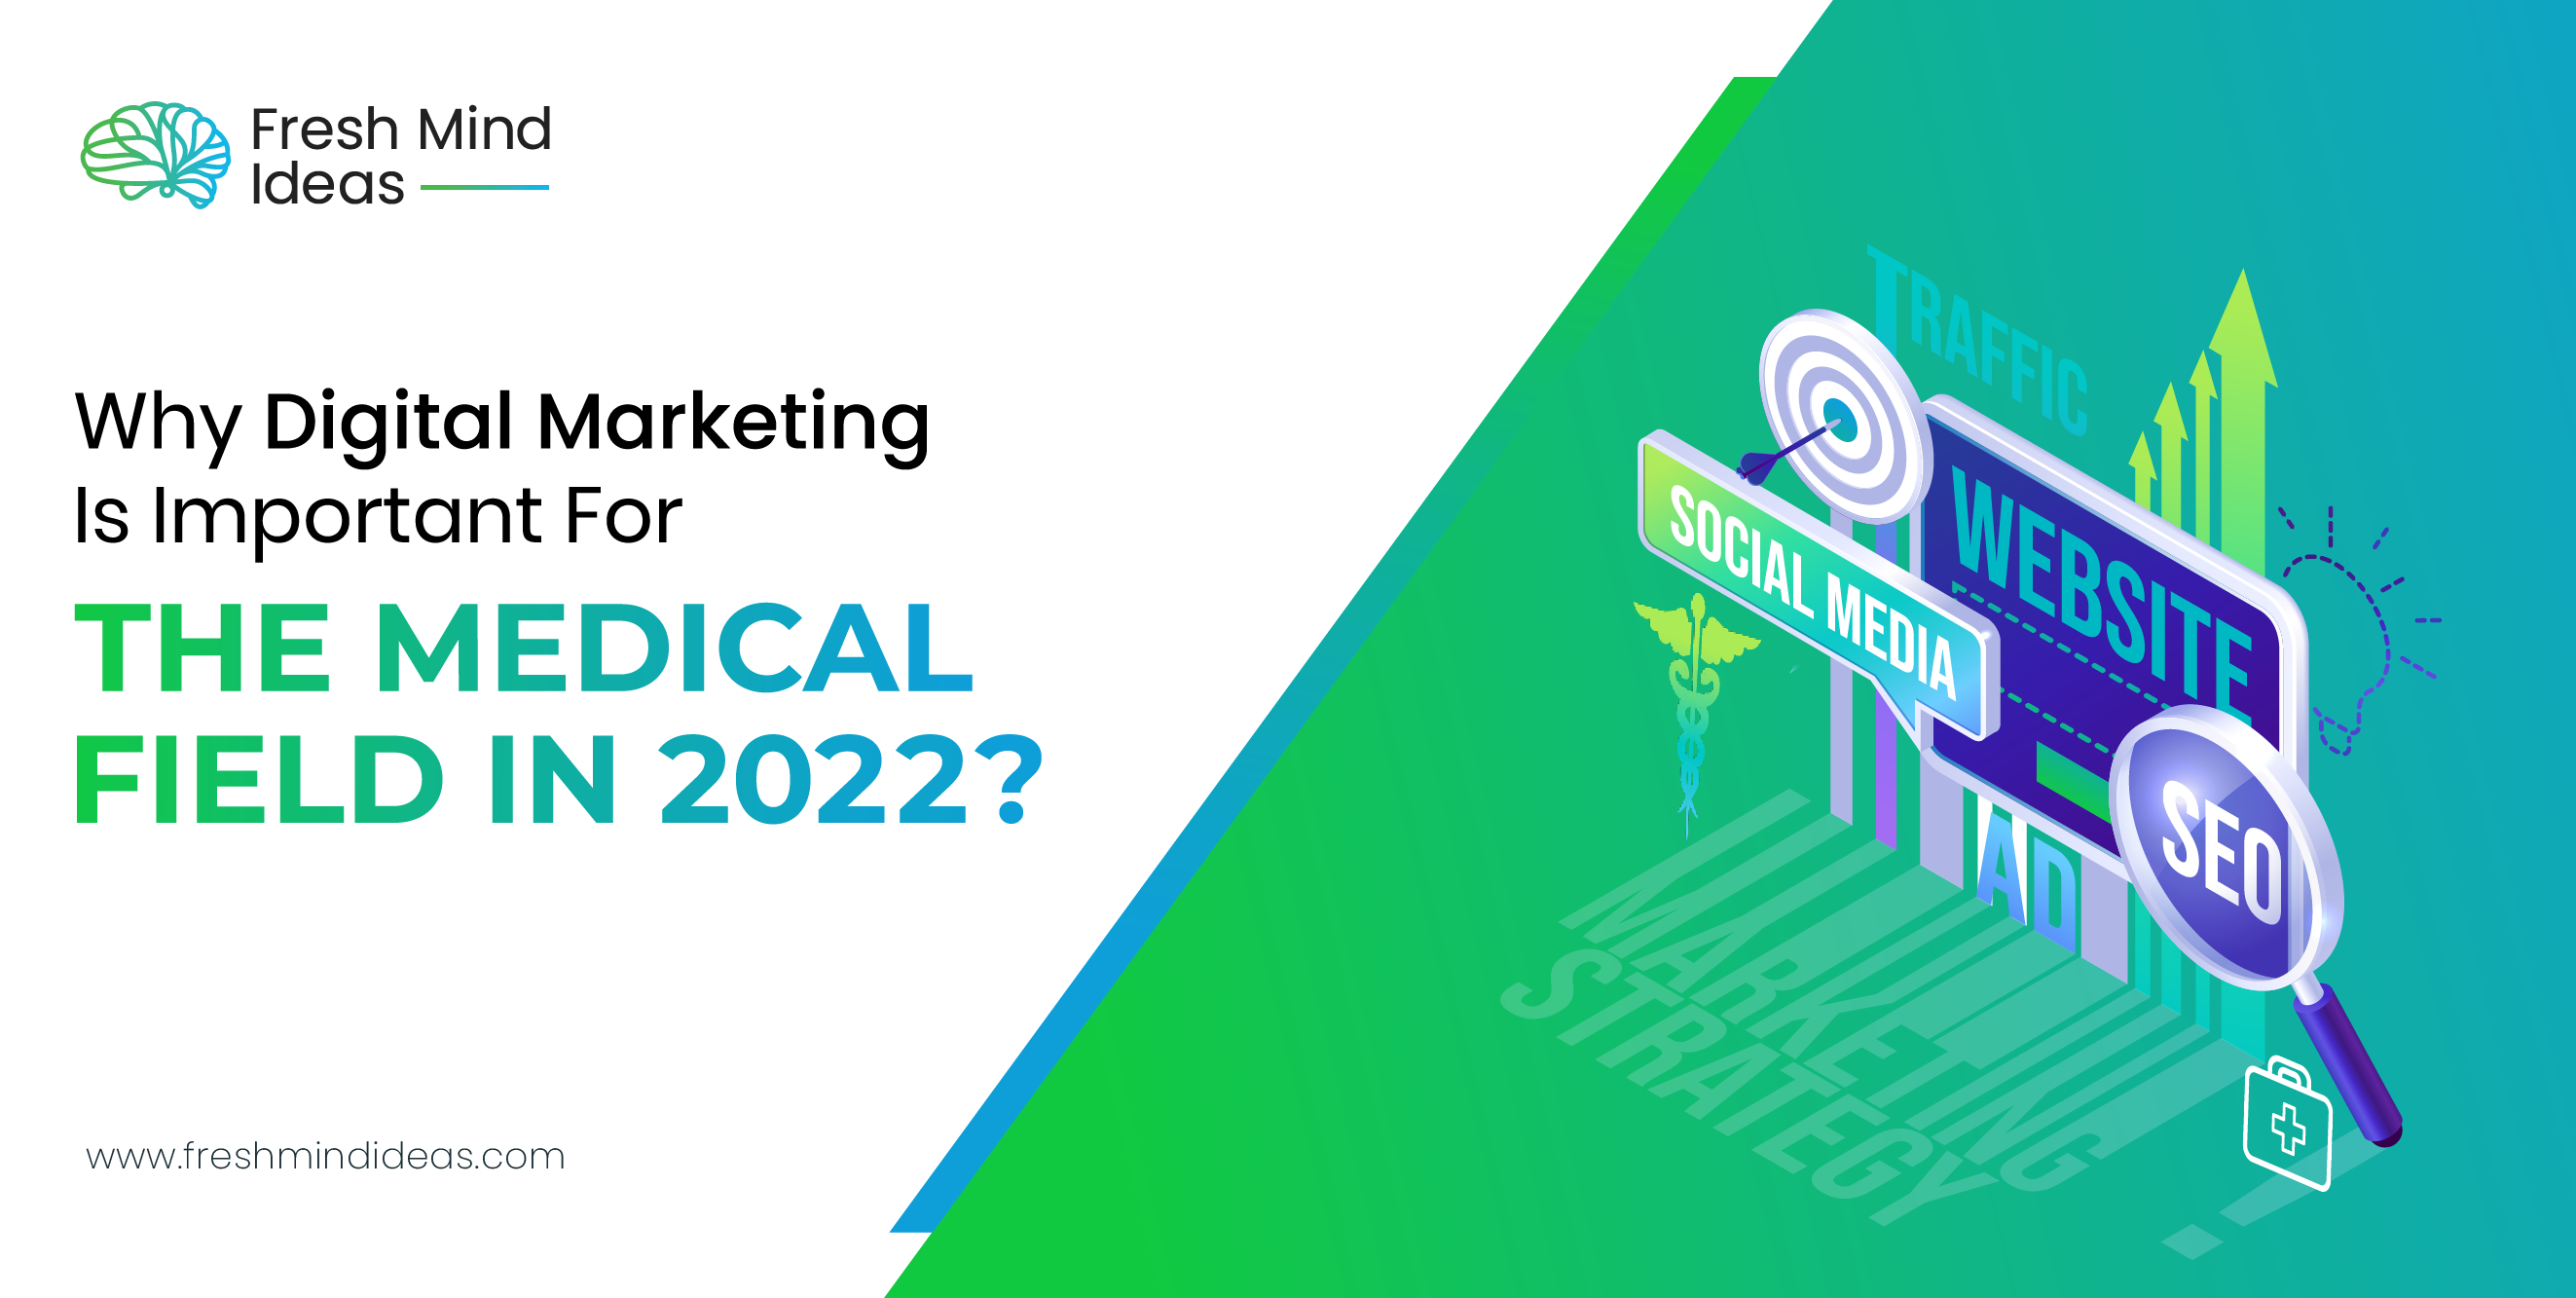 Why Digital Marketing Is Important For The Medical Field In 2022